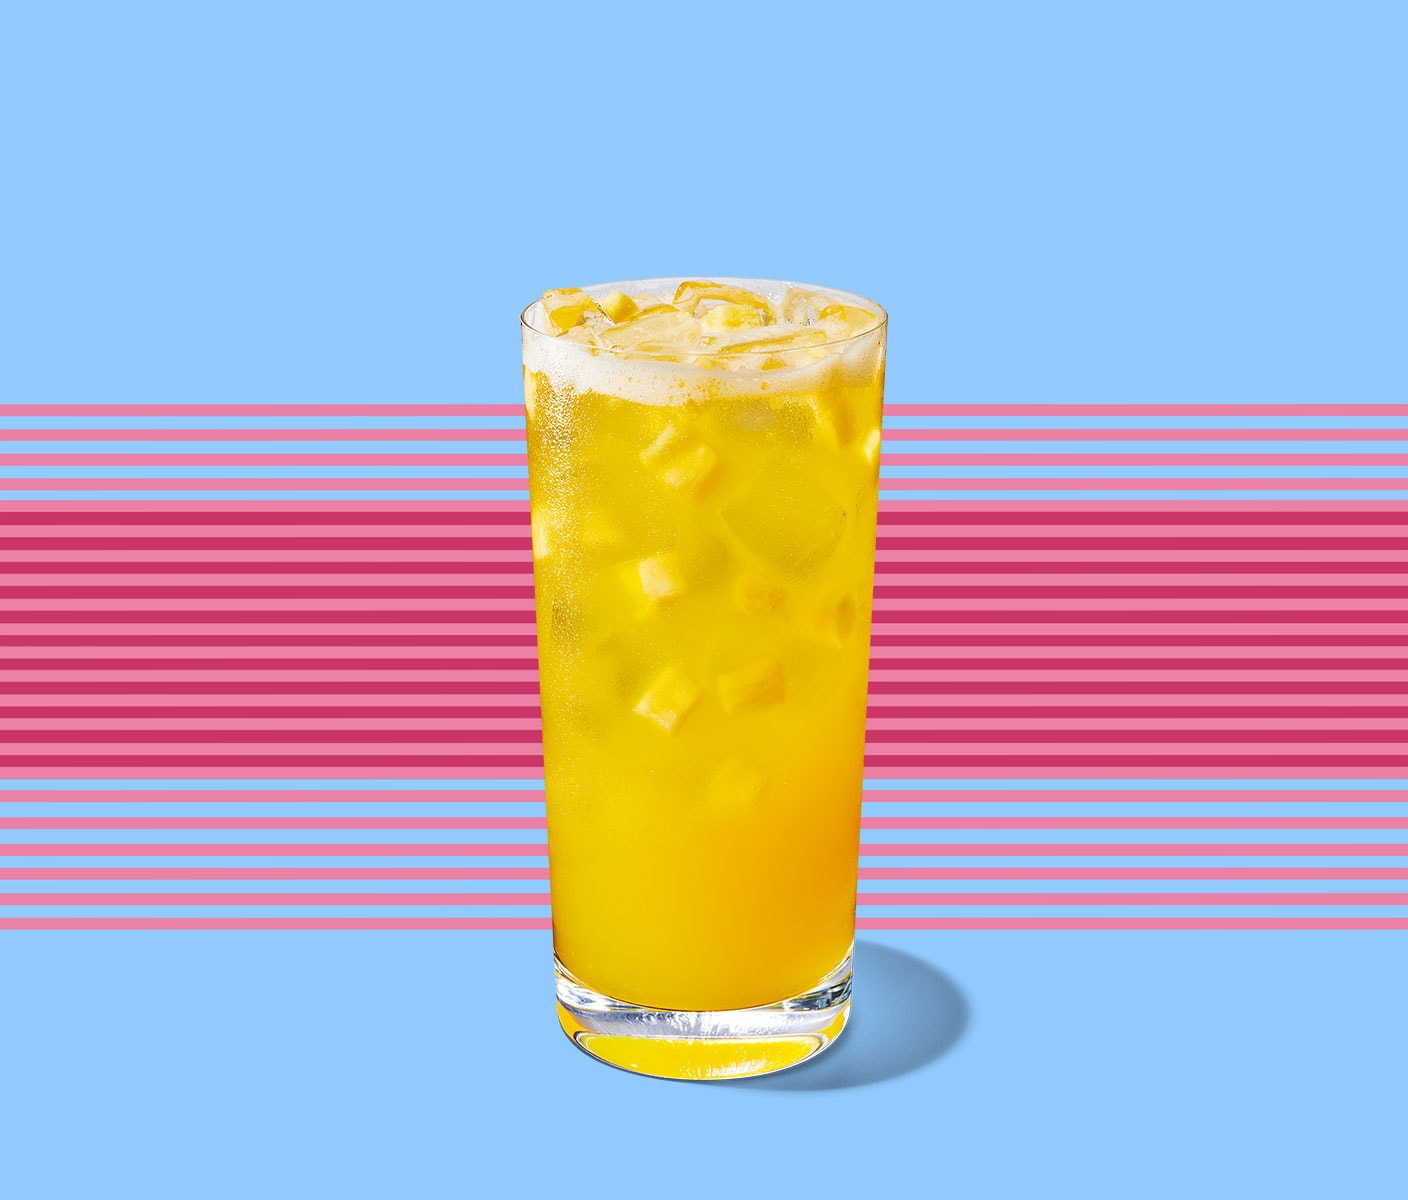 Bright, semi-translucent drink with fruit inclusions in a tall, narrow glass. Thin, horizontal lines form a background behind.